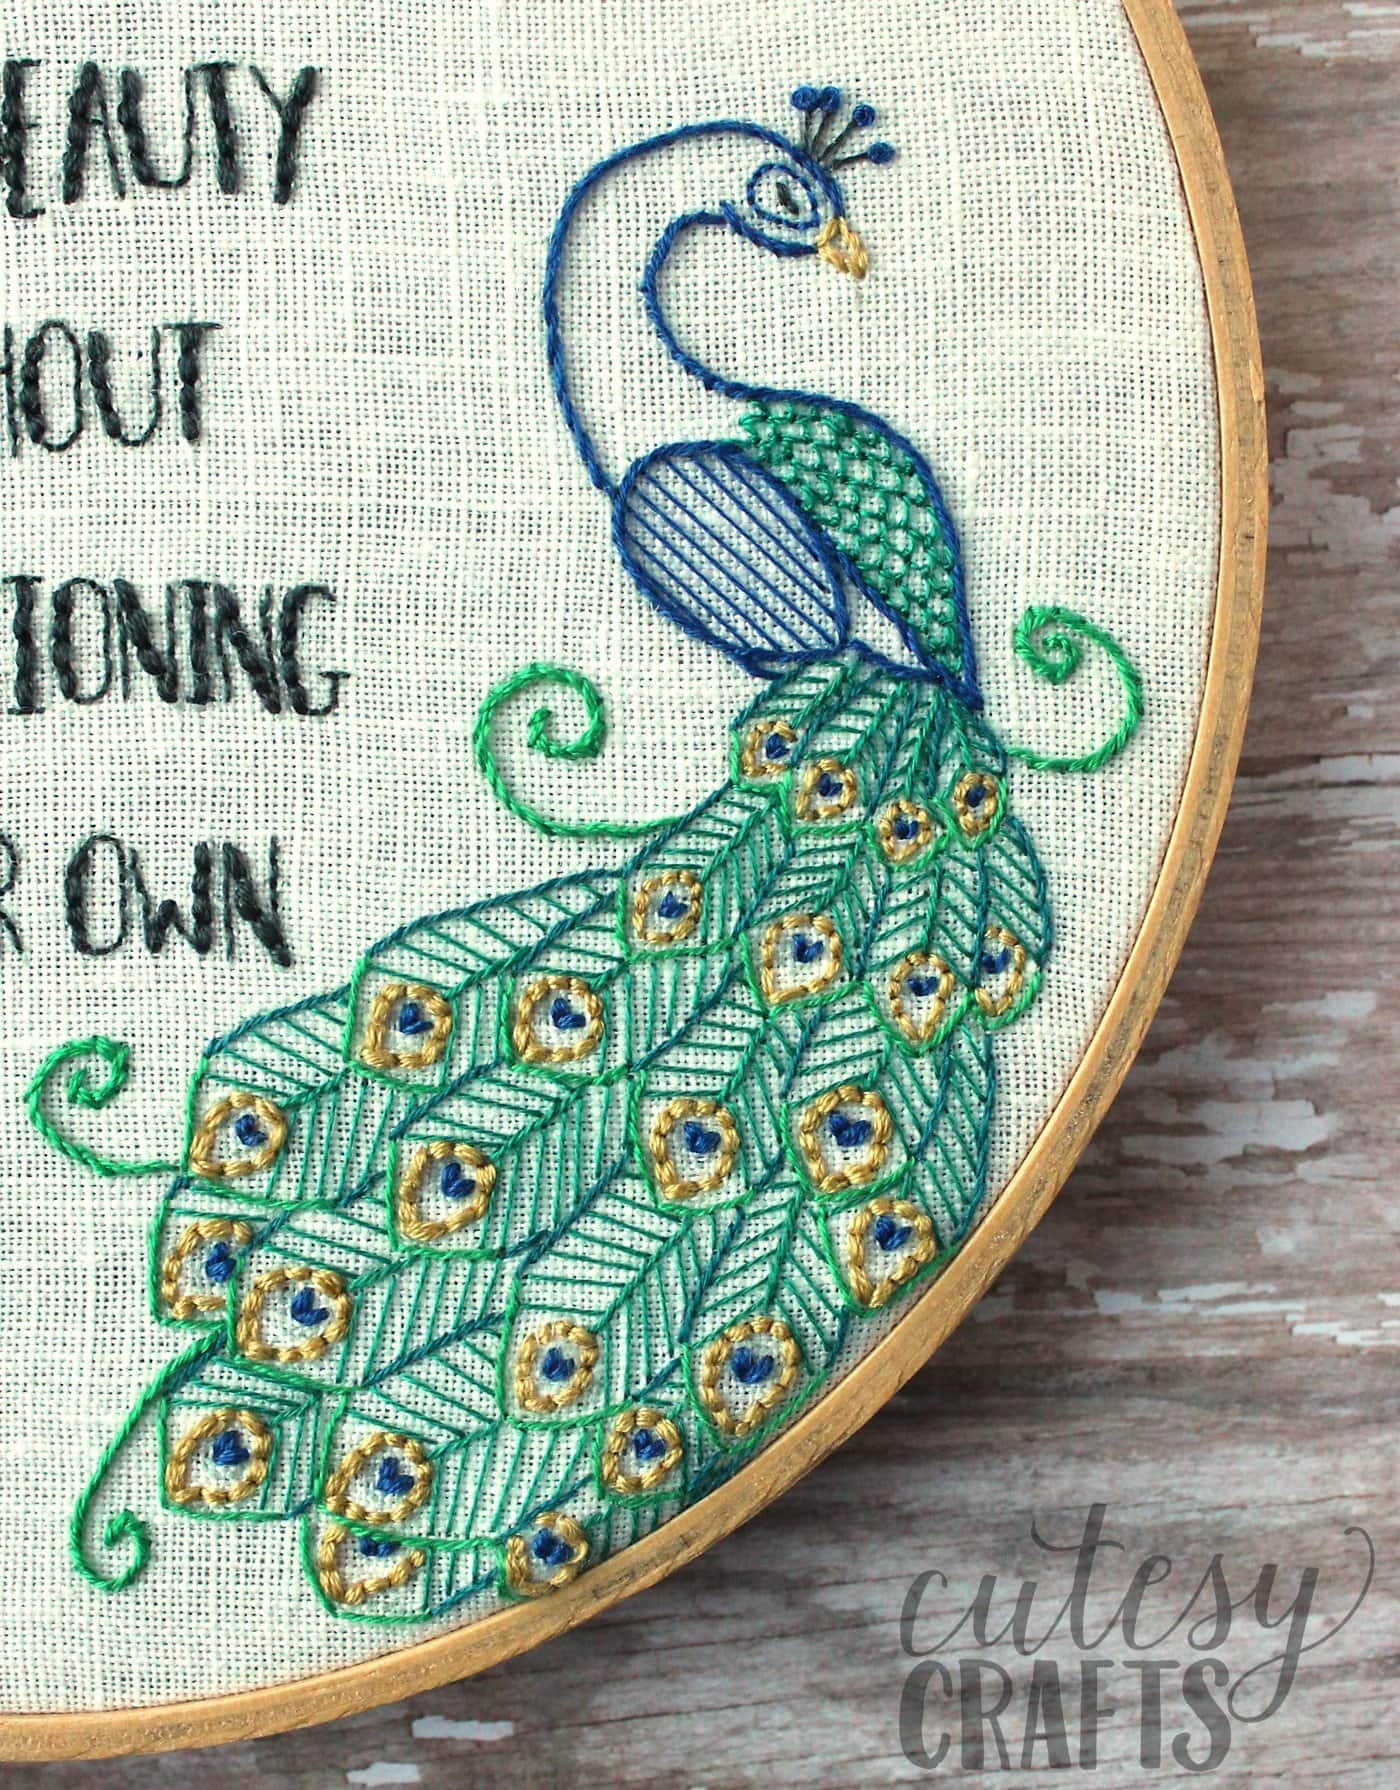 Flamingo and Peacock Free Embroidery Pattern - Quote embroidery "Admire Someone else's beauty without questioning your own" #embroiderypattern #freeembroiderypattern #flamingo #peacock #embroiderypatternquote